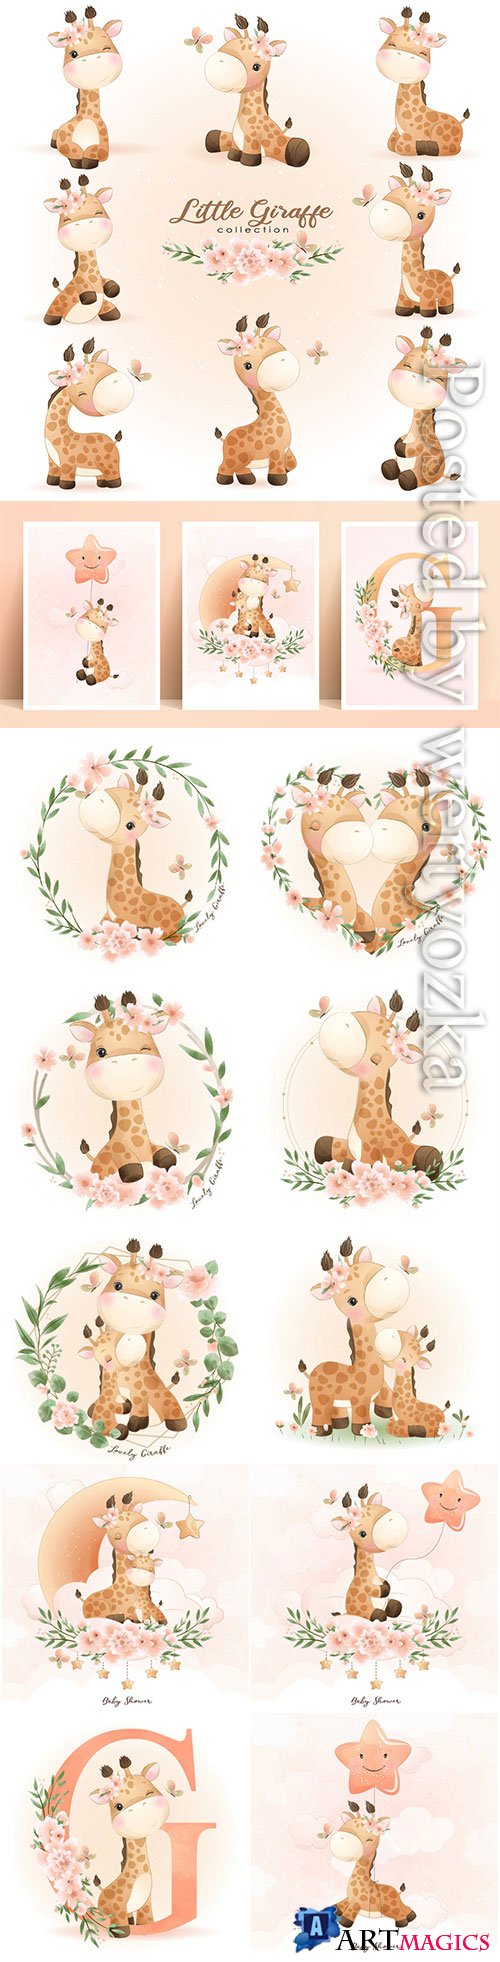 Cute doodle giraffe poses with floral illustration premium vector